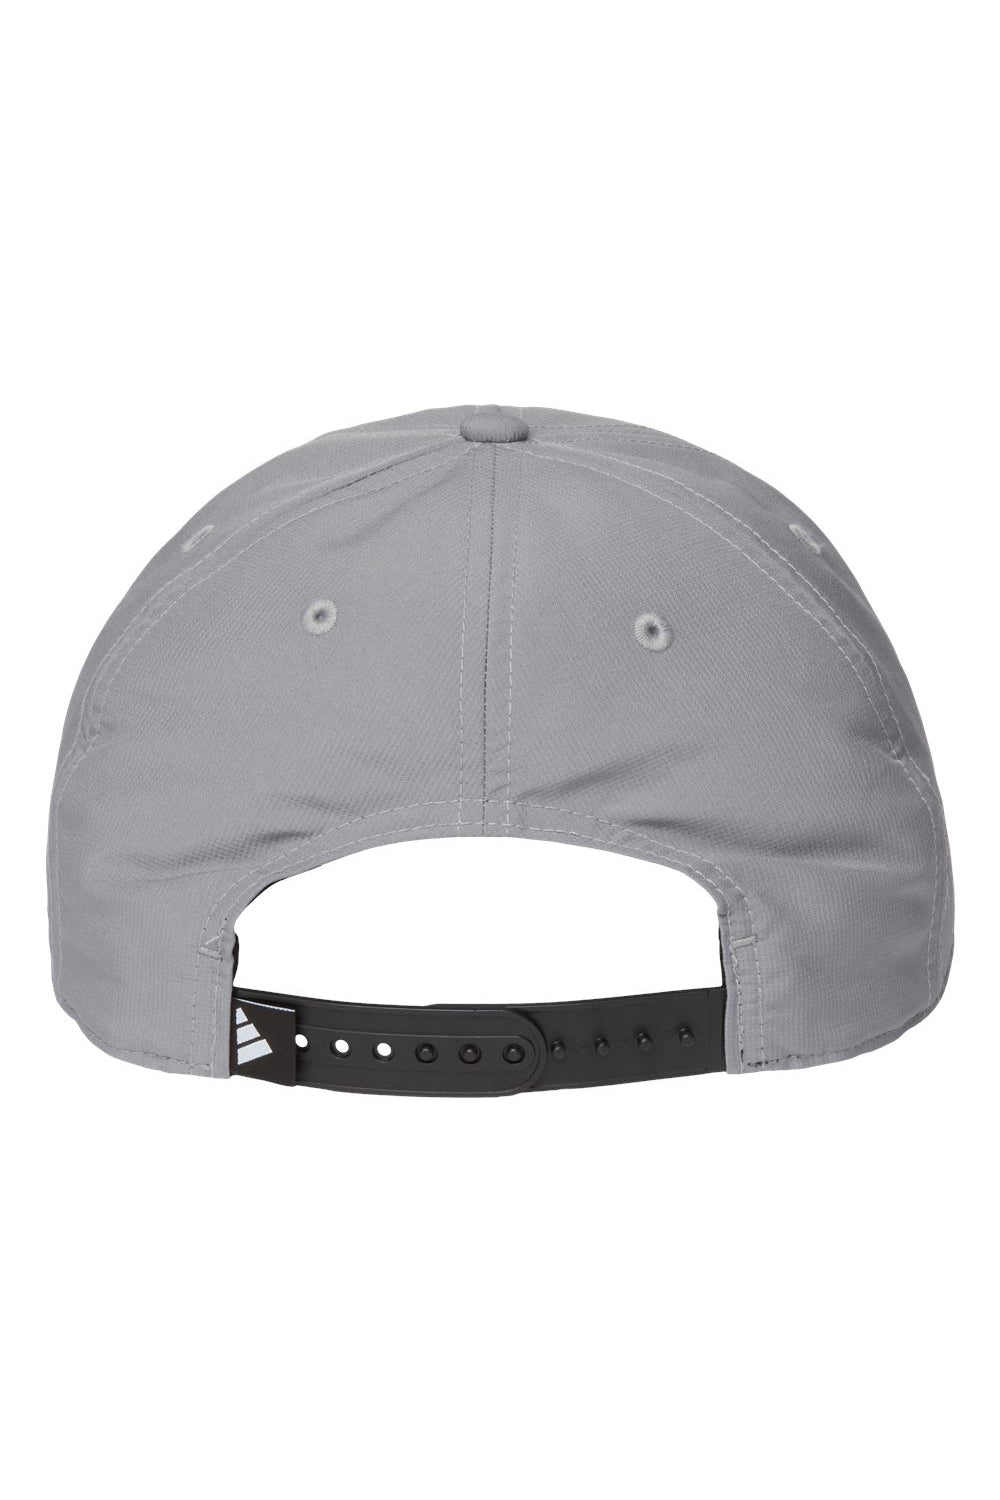 Adidas A600S Mens Sustainable Performance Max Moisture Wicking Snapback Hat Grey Flat Back